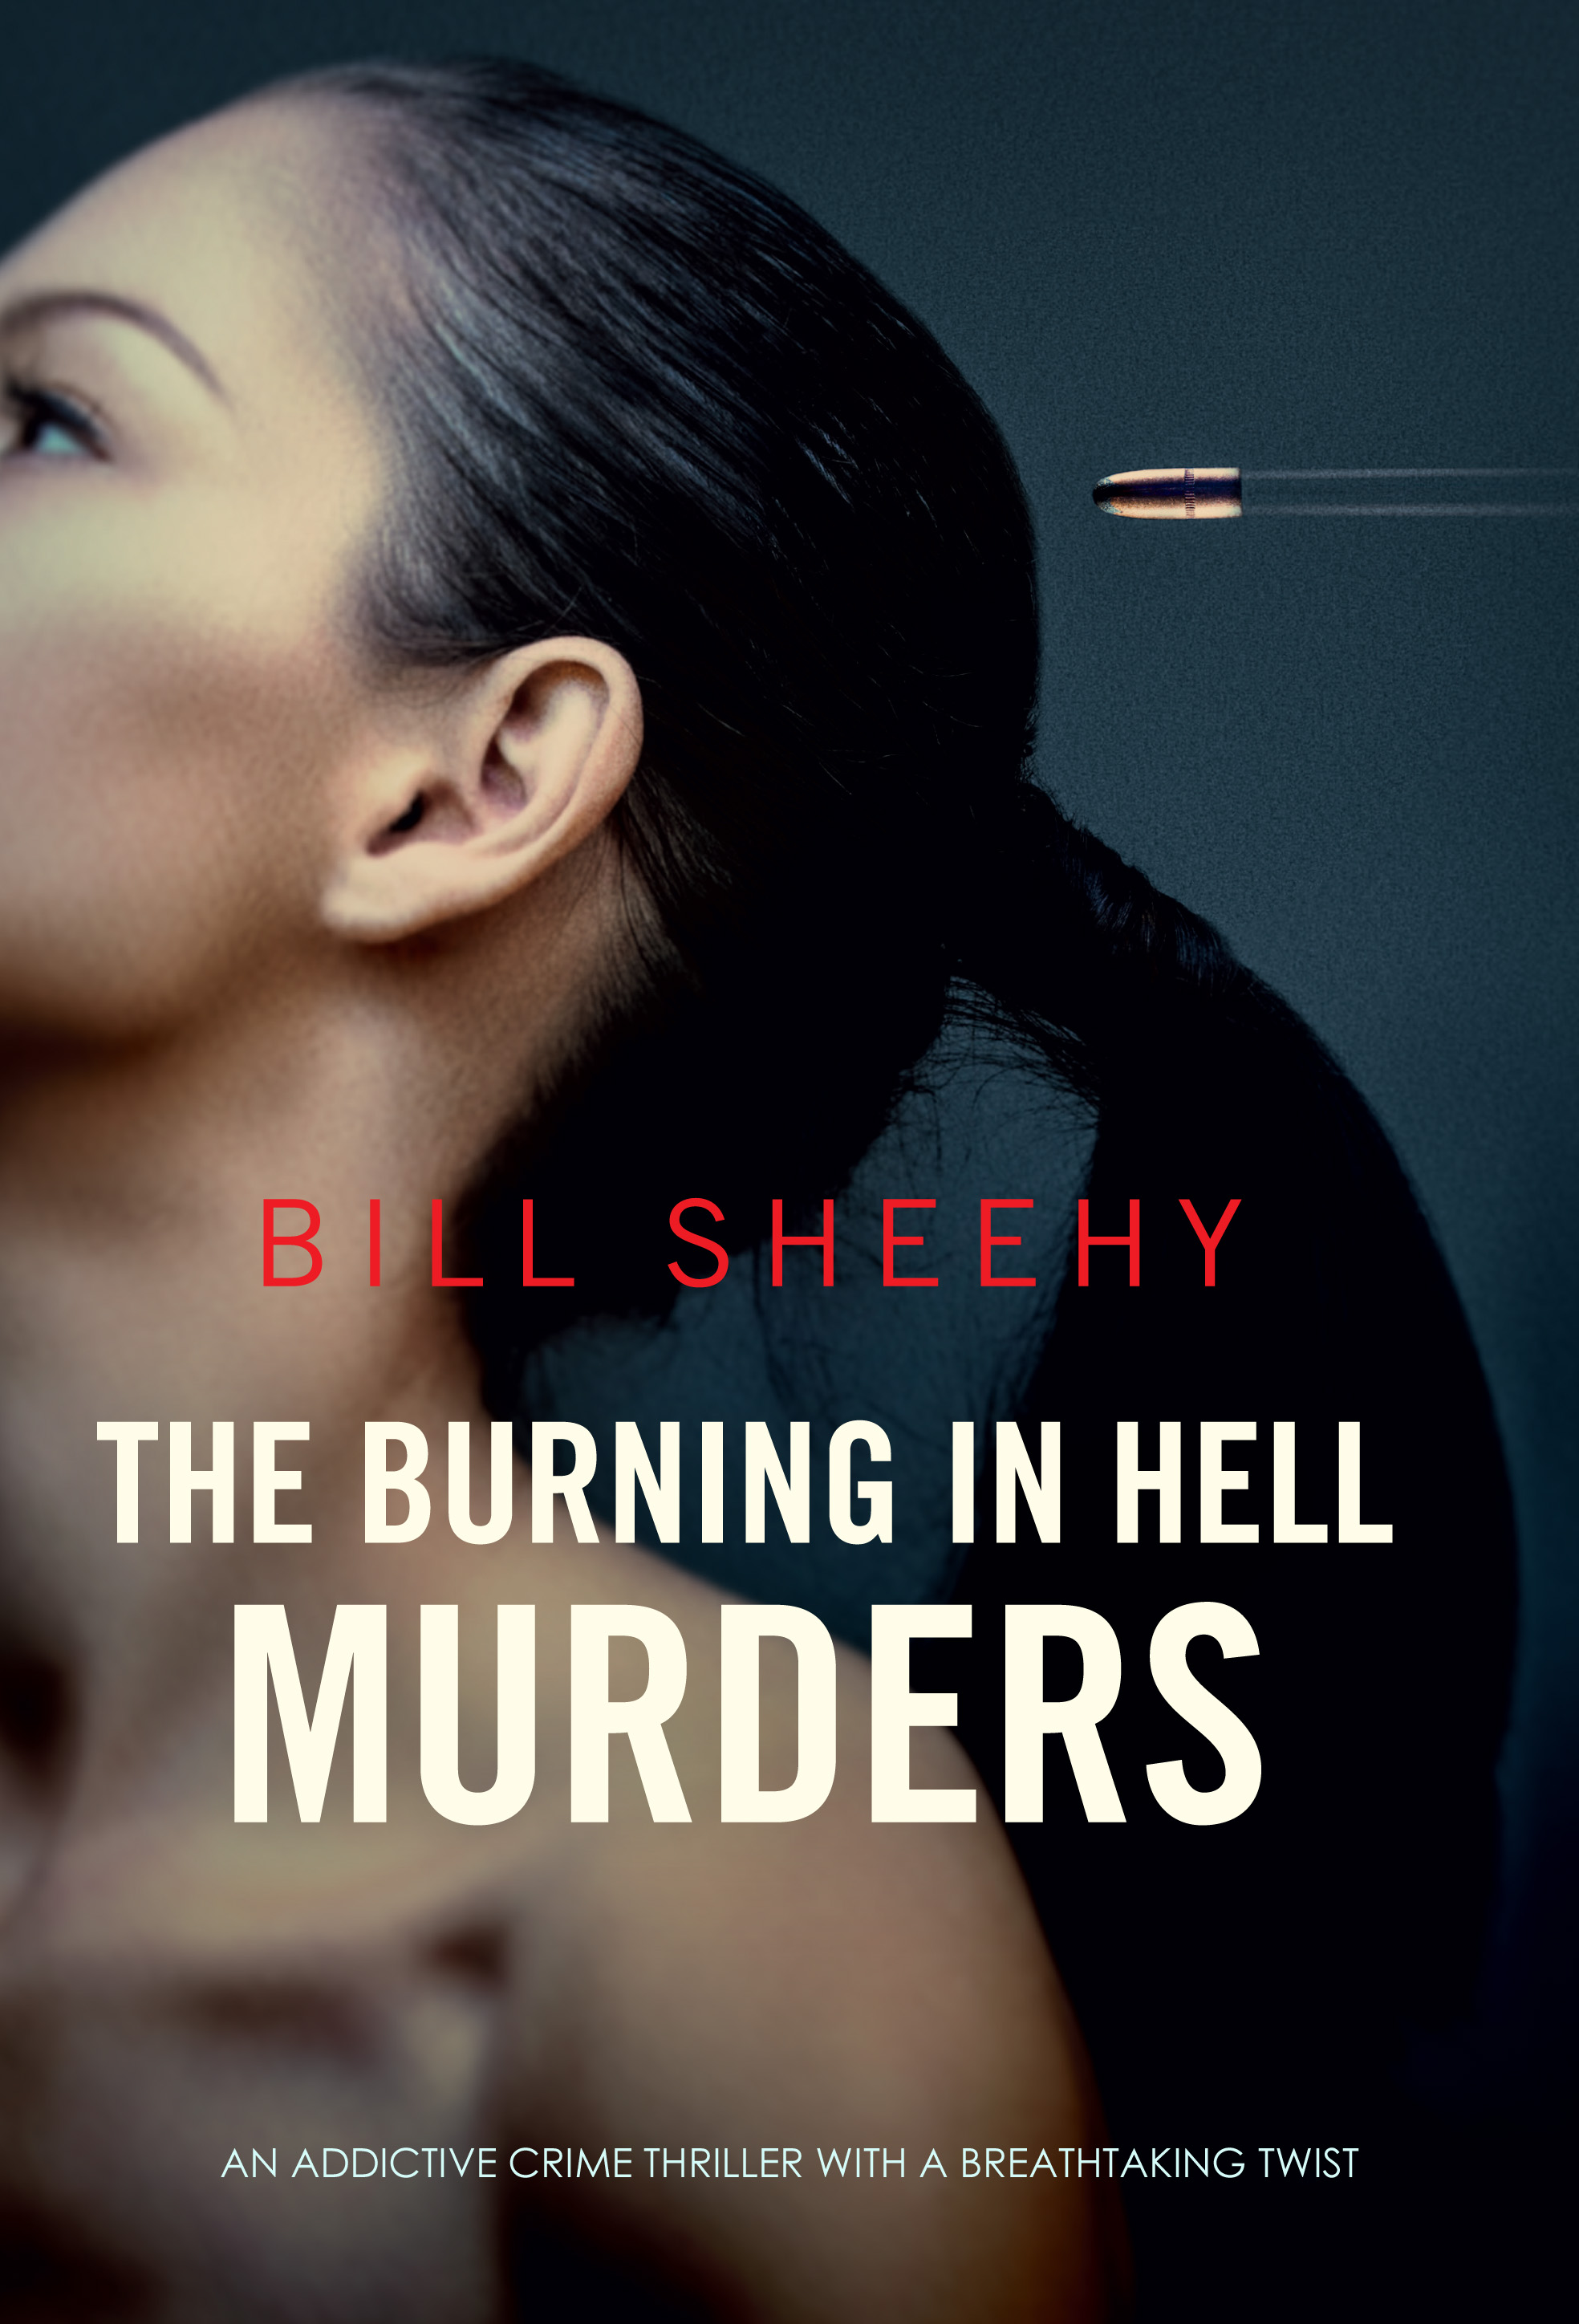 The Burning in Hell Murders publish.jpg